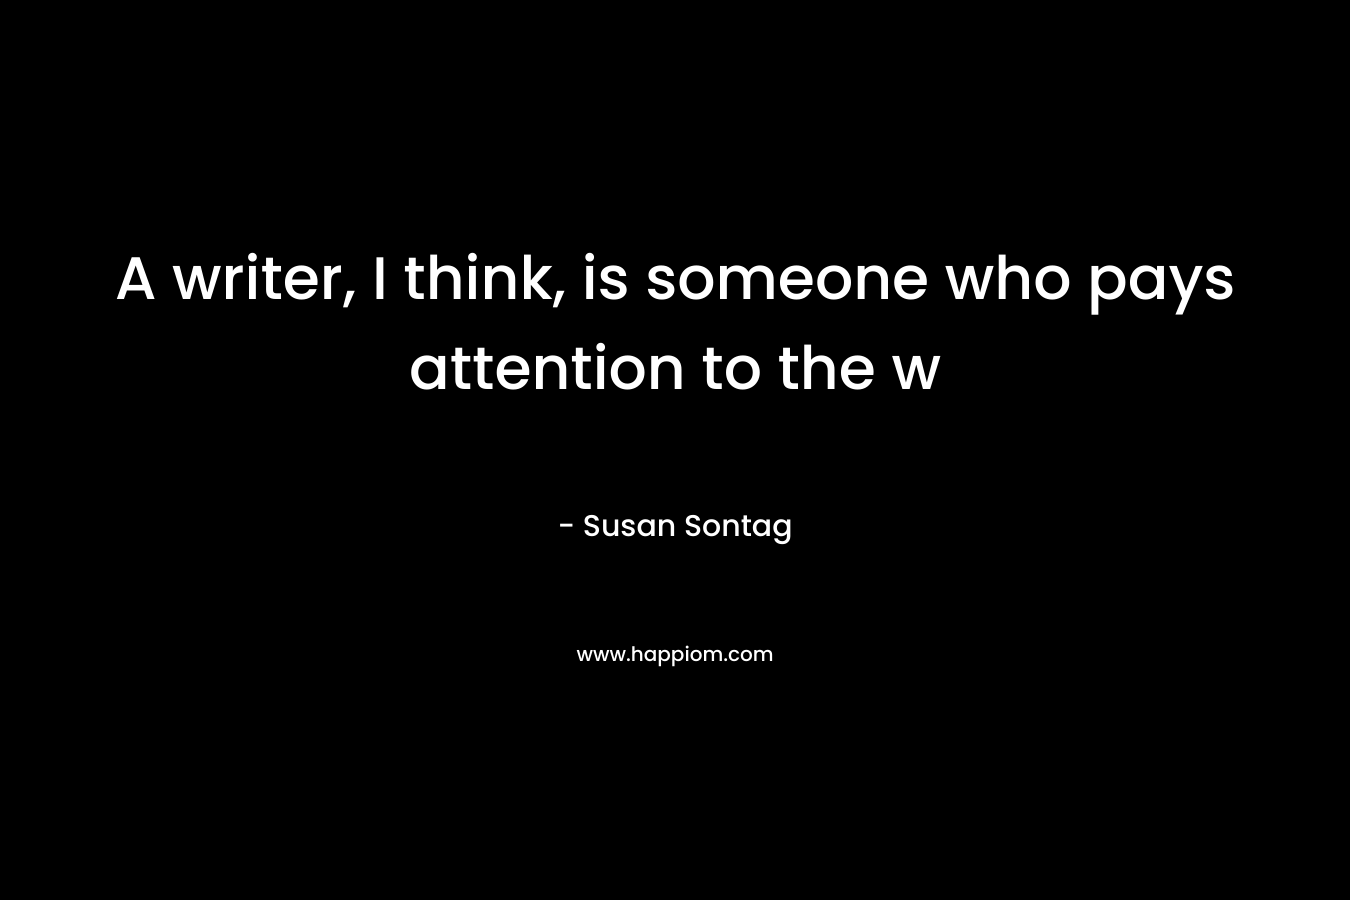 A writer, I think, is someone who pays attention to the w – Susan Sontag